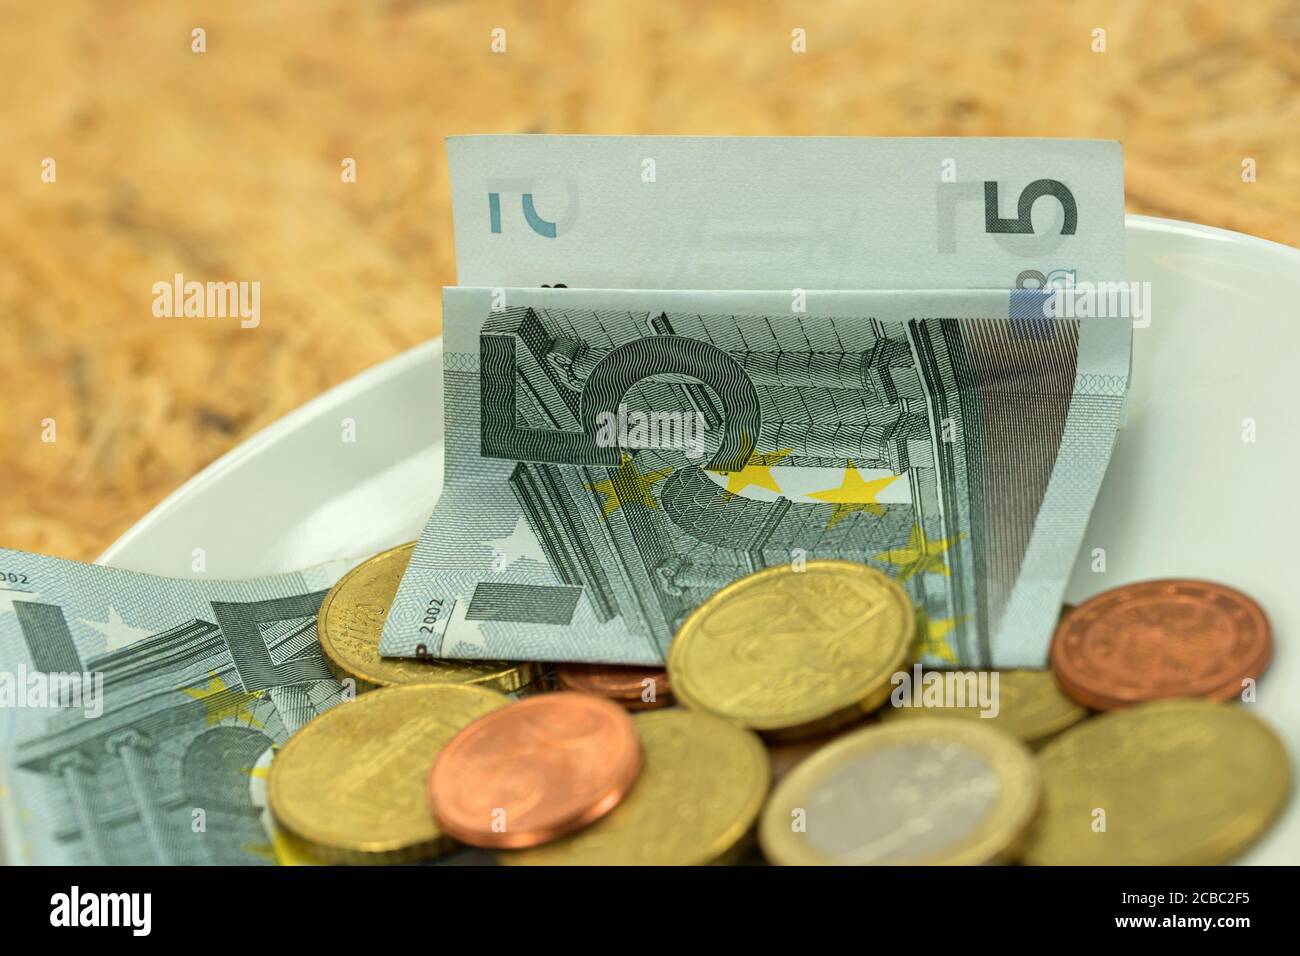 Small money on a plate Stock Photo